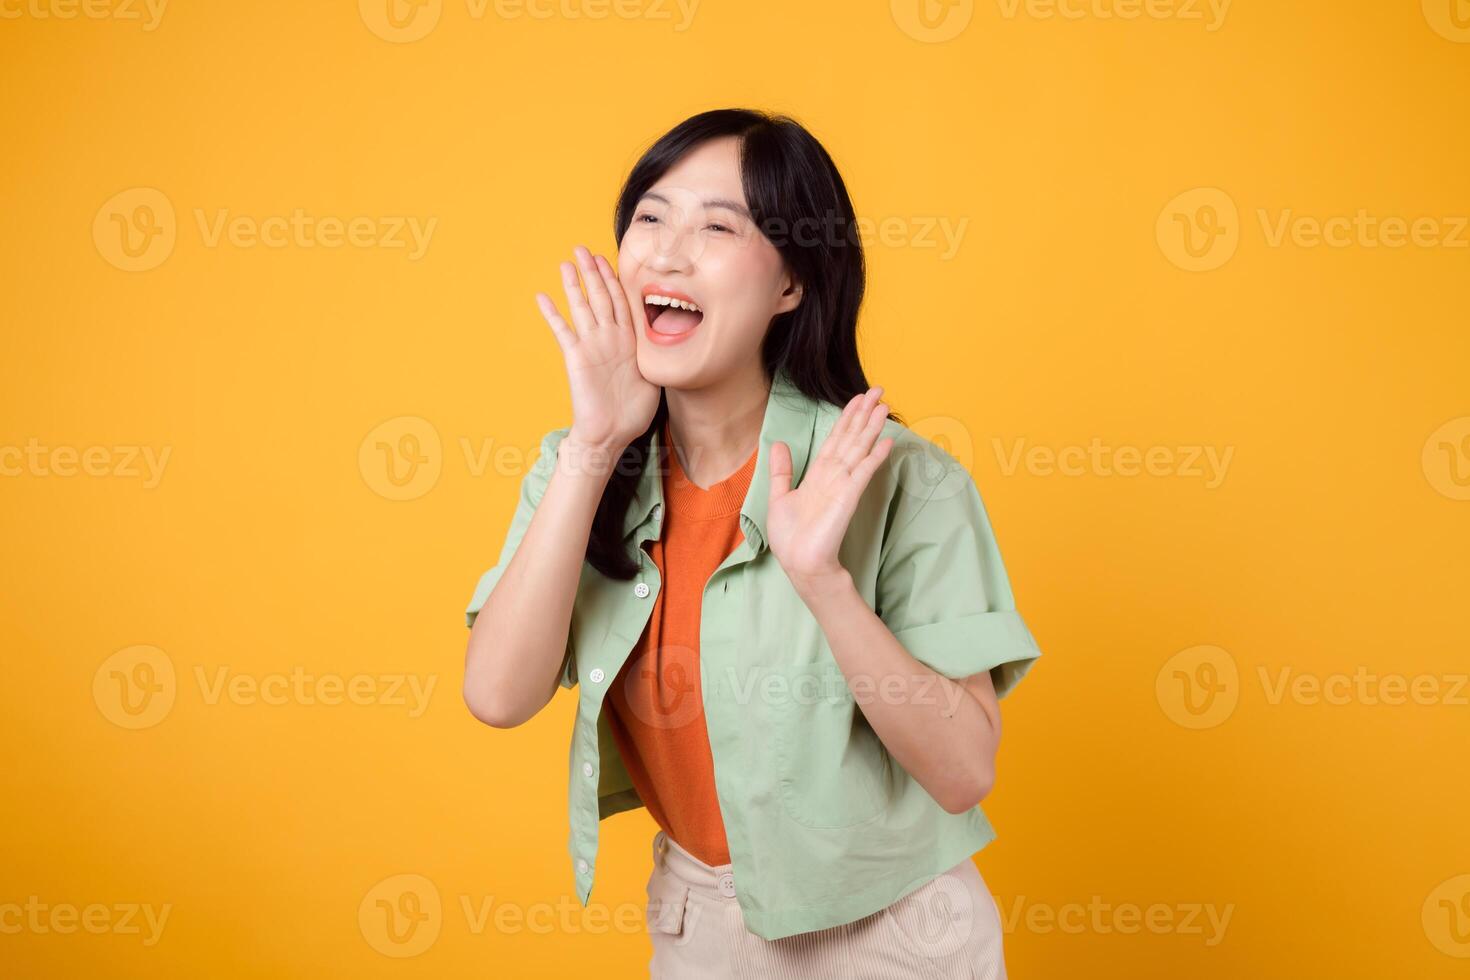 Energetic young Asian woman in her 30s wearing a green shirt on an orange background, shouting with excitement. Explore the concept of discount shopping promotion with this vibrant image. photo